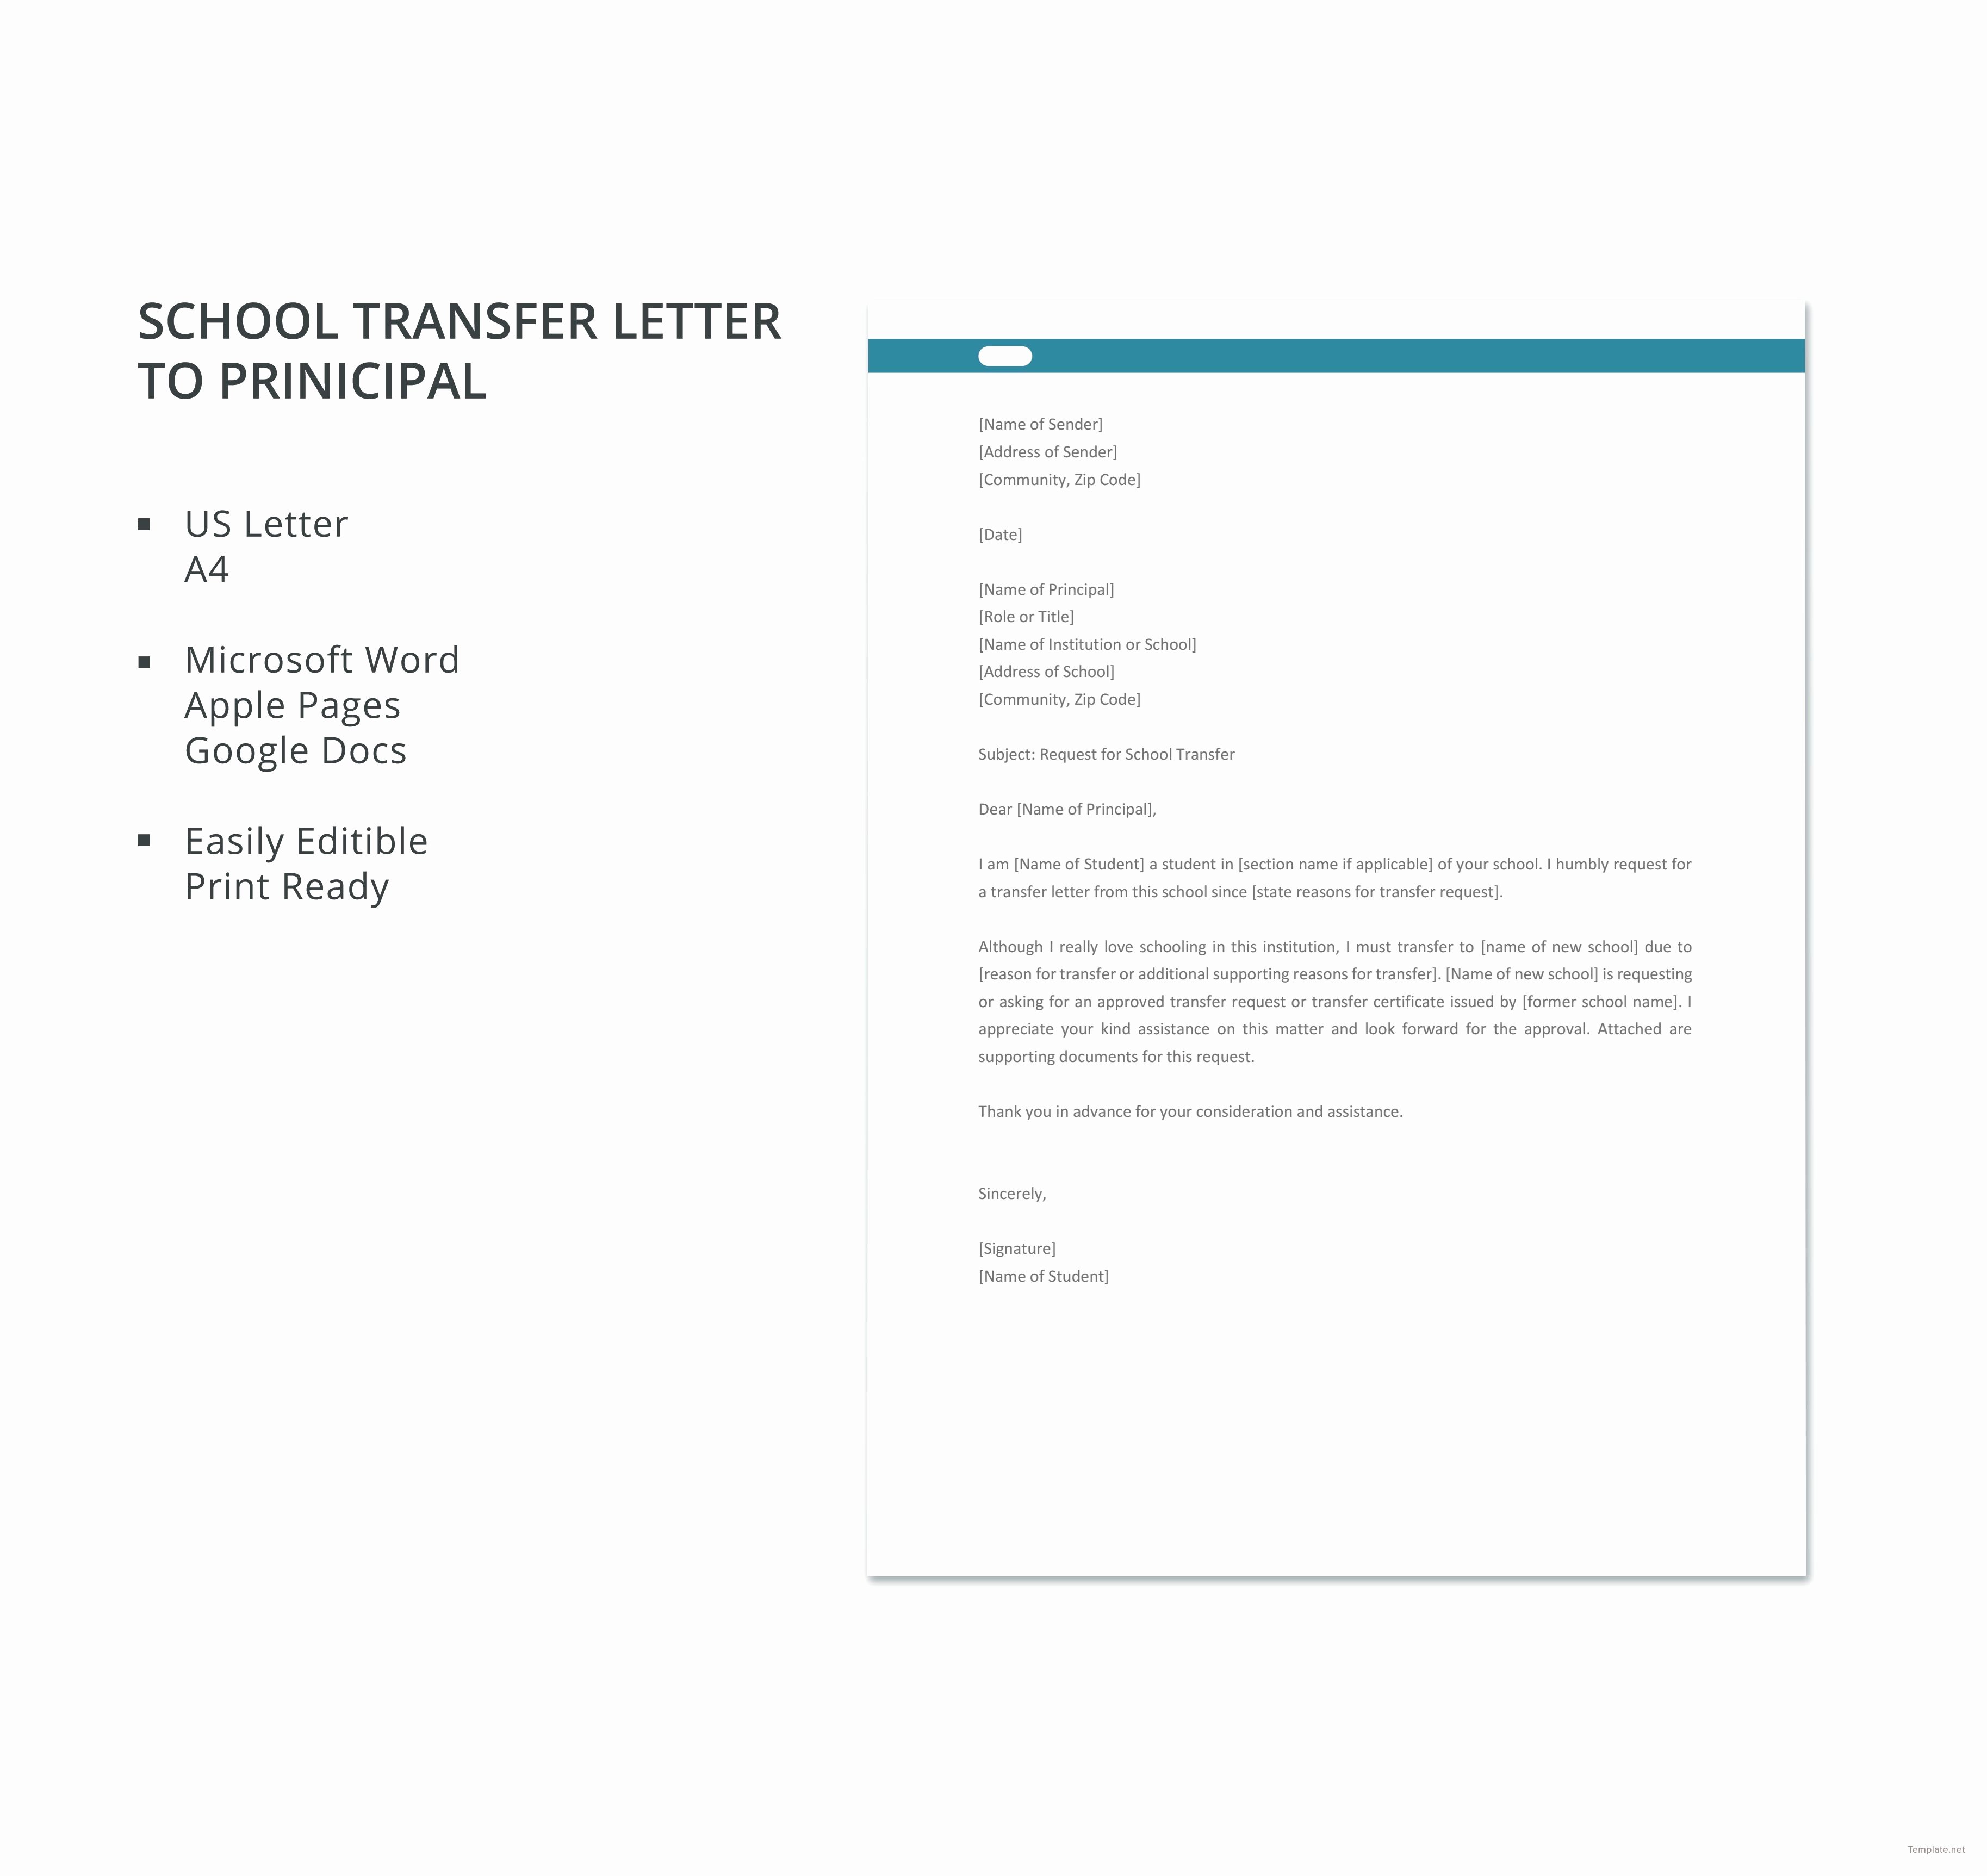 School Transfer Request Letter Unique Free School Transfer Letter to Principal Nursery Rhymes